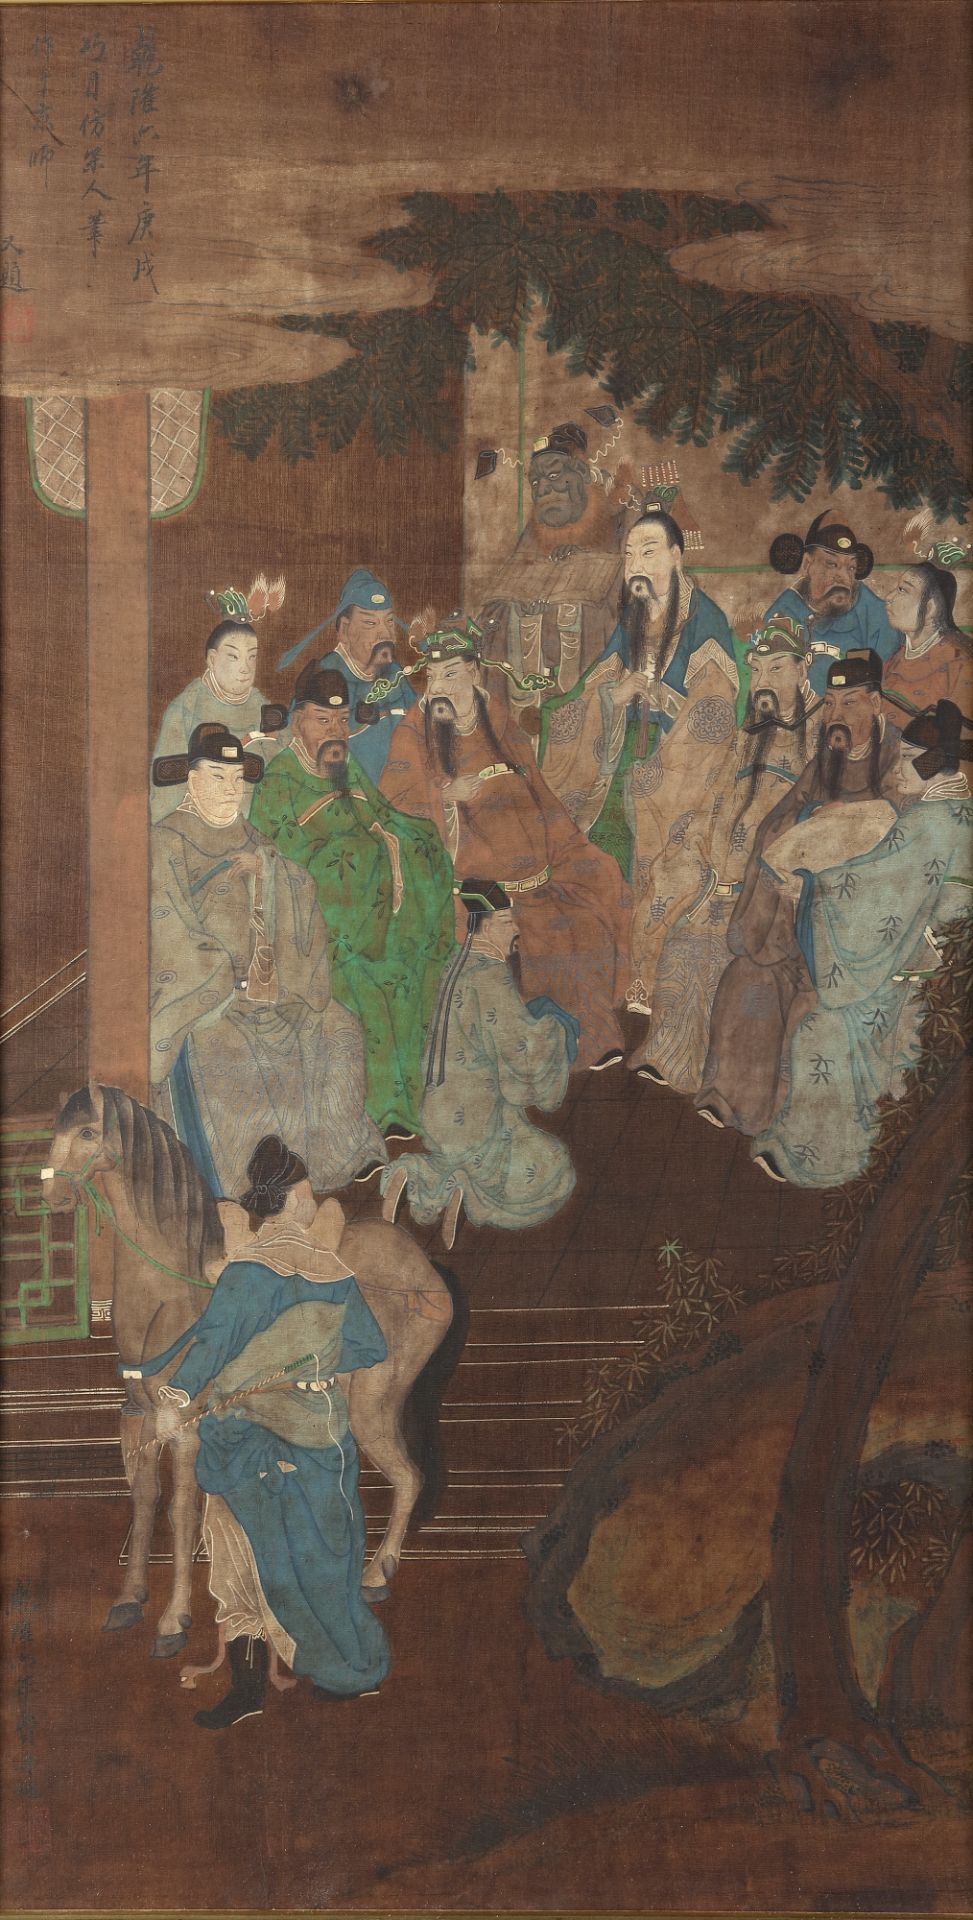 A CHINESE PAINTING OF IMMORTALS, 18TH CENTURY